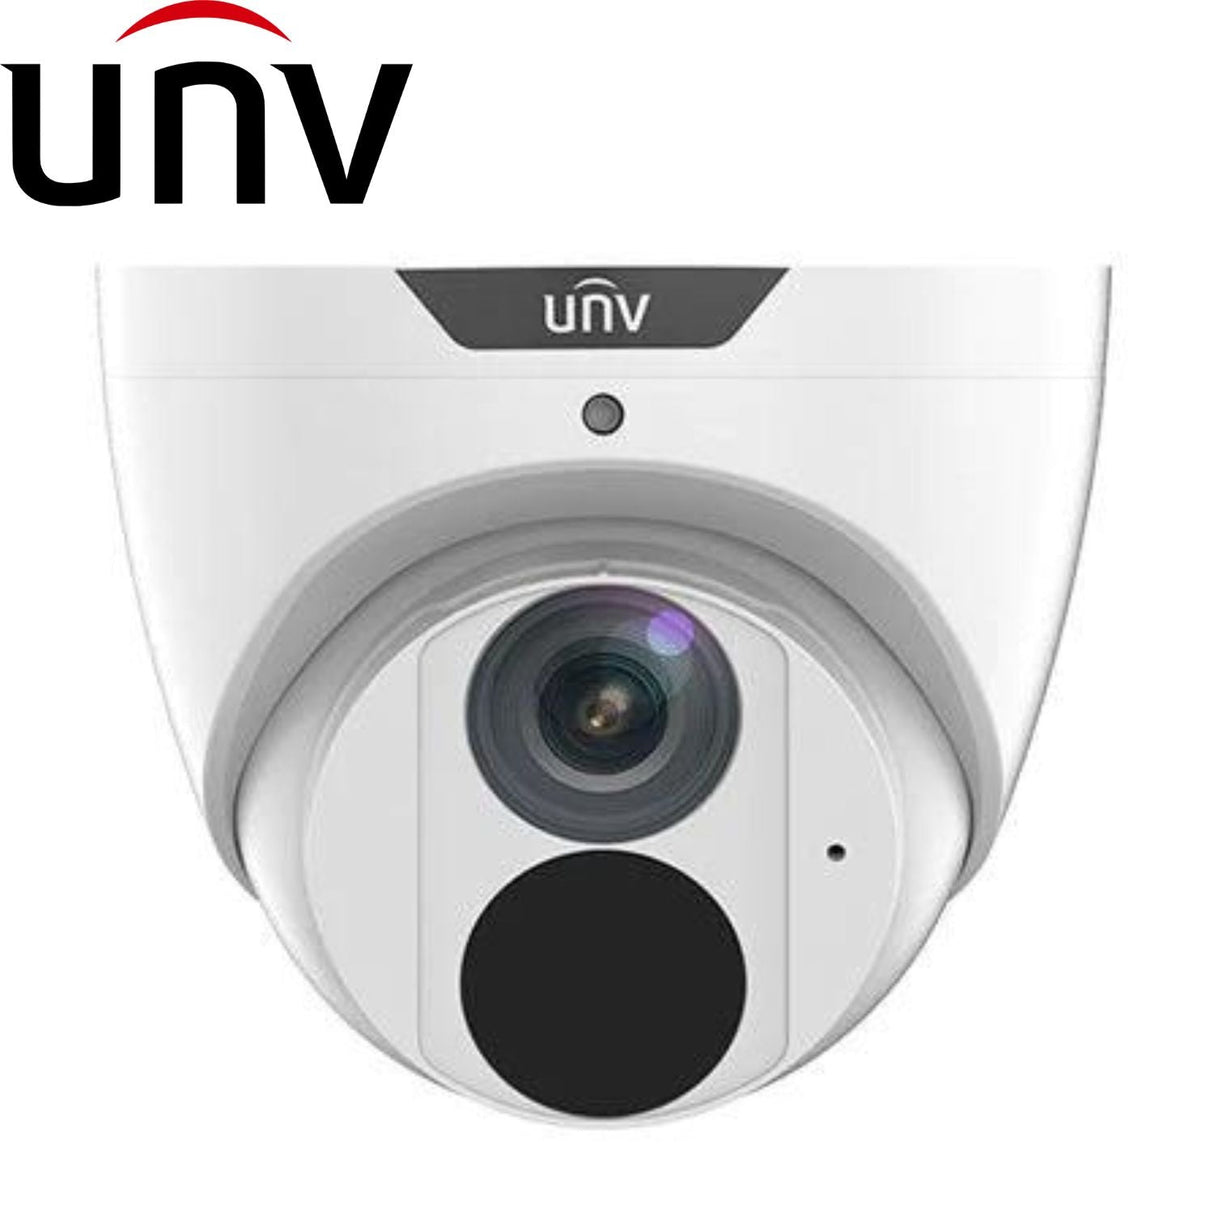 Uniview LightHunter Security System: 8x 6MP Turret Cams, 8CH 4K NVR + HDD